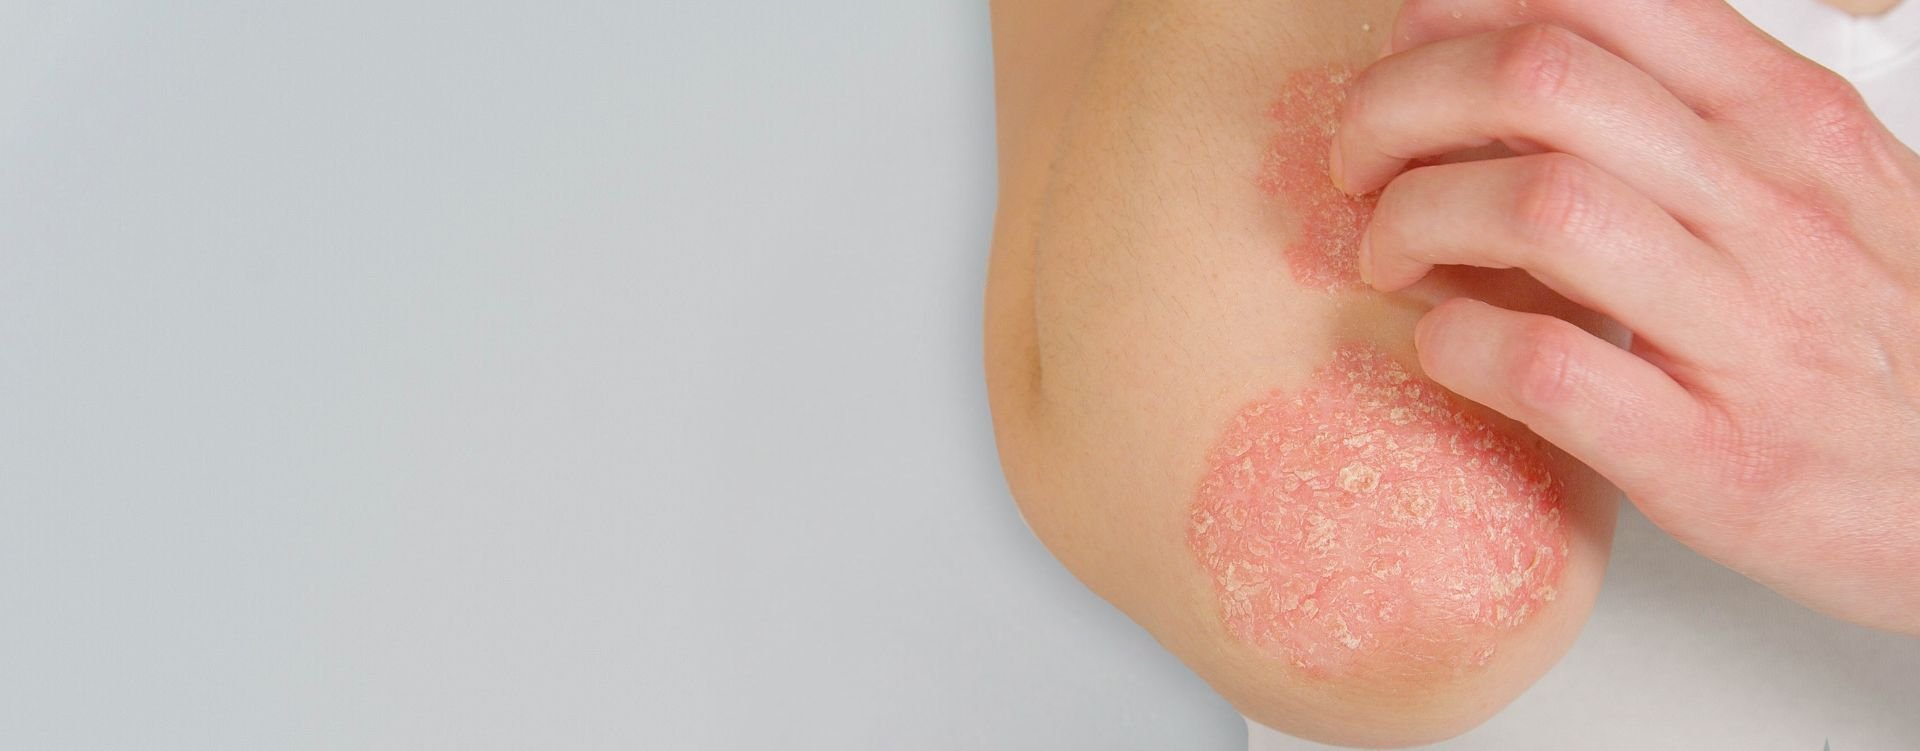 psoriasis clinic in Canada